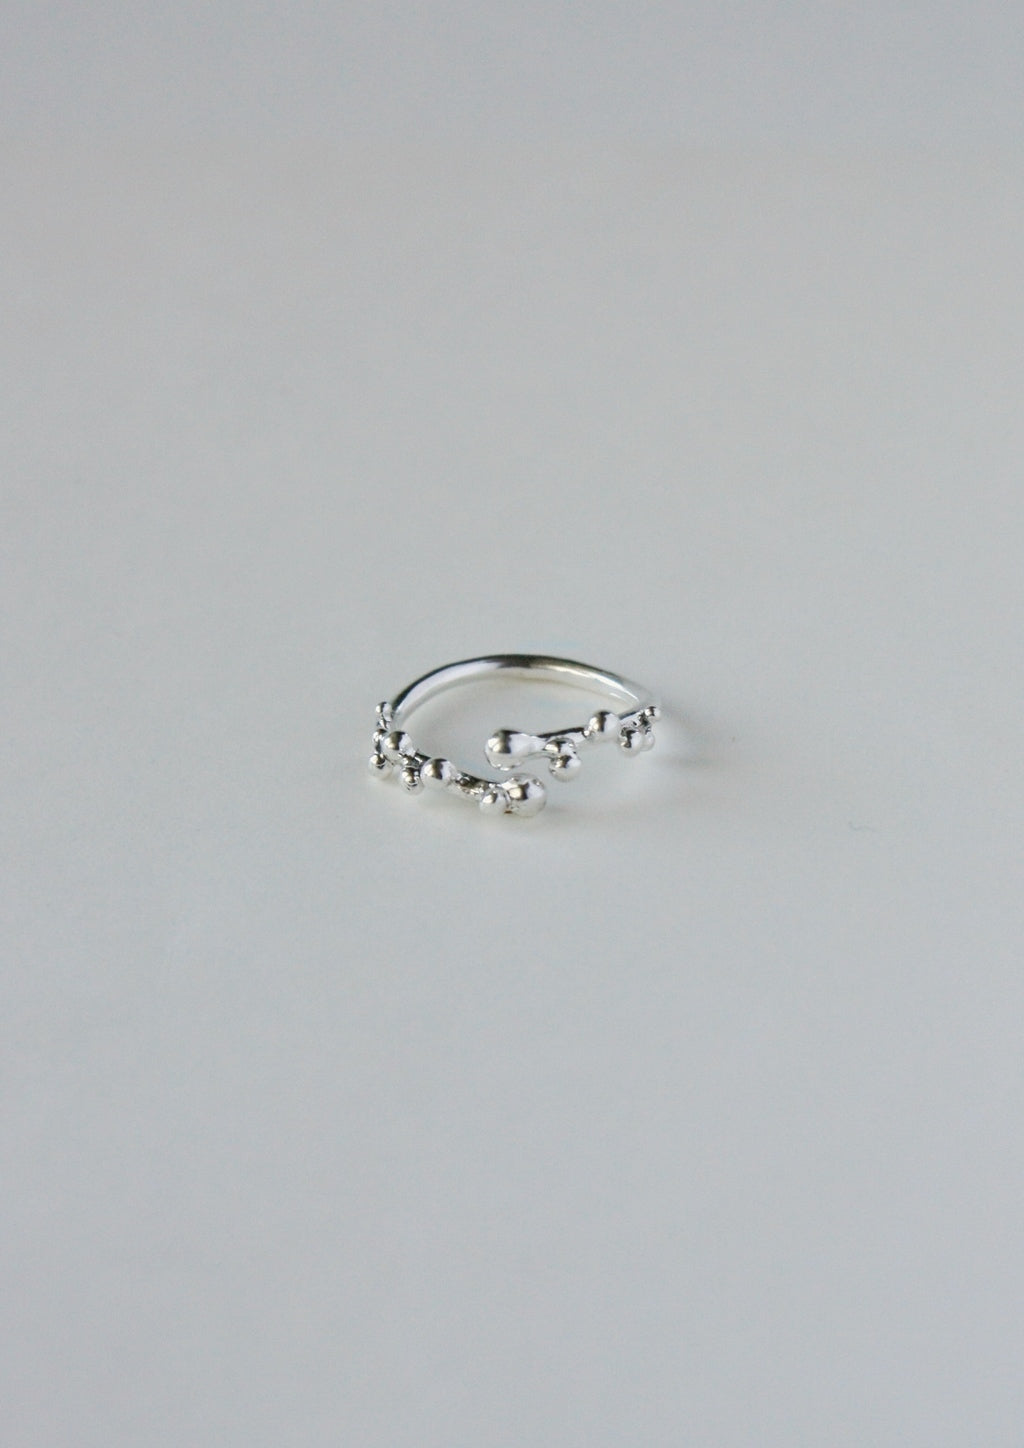 Ring "Hug with bubbles" one size